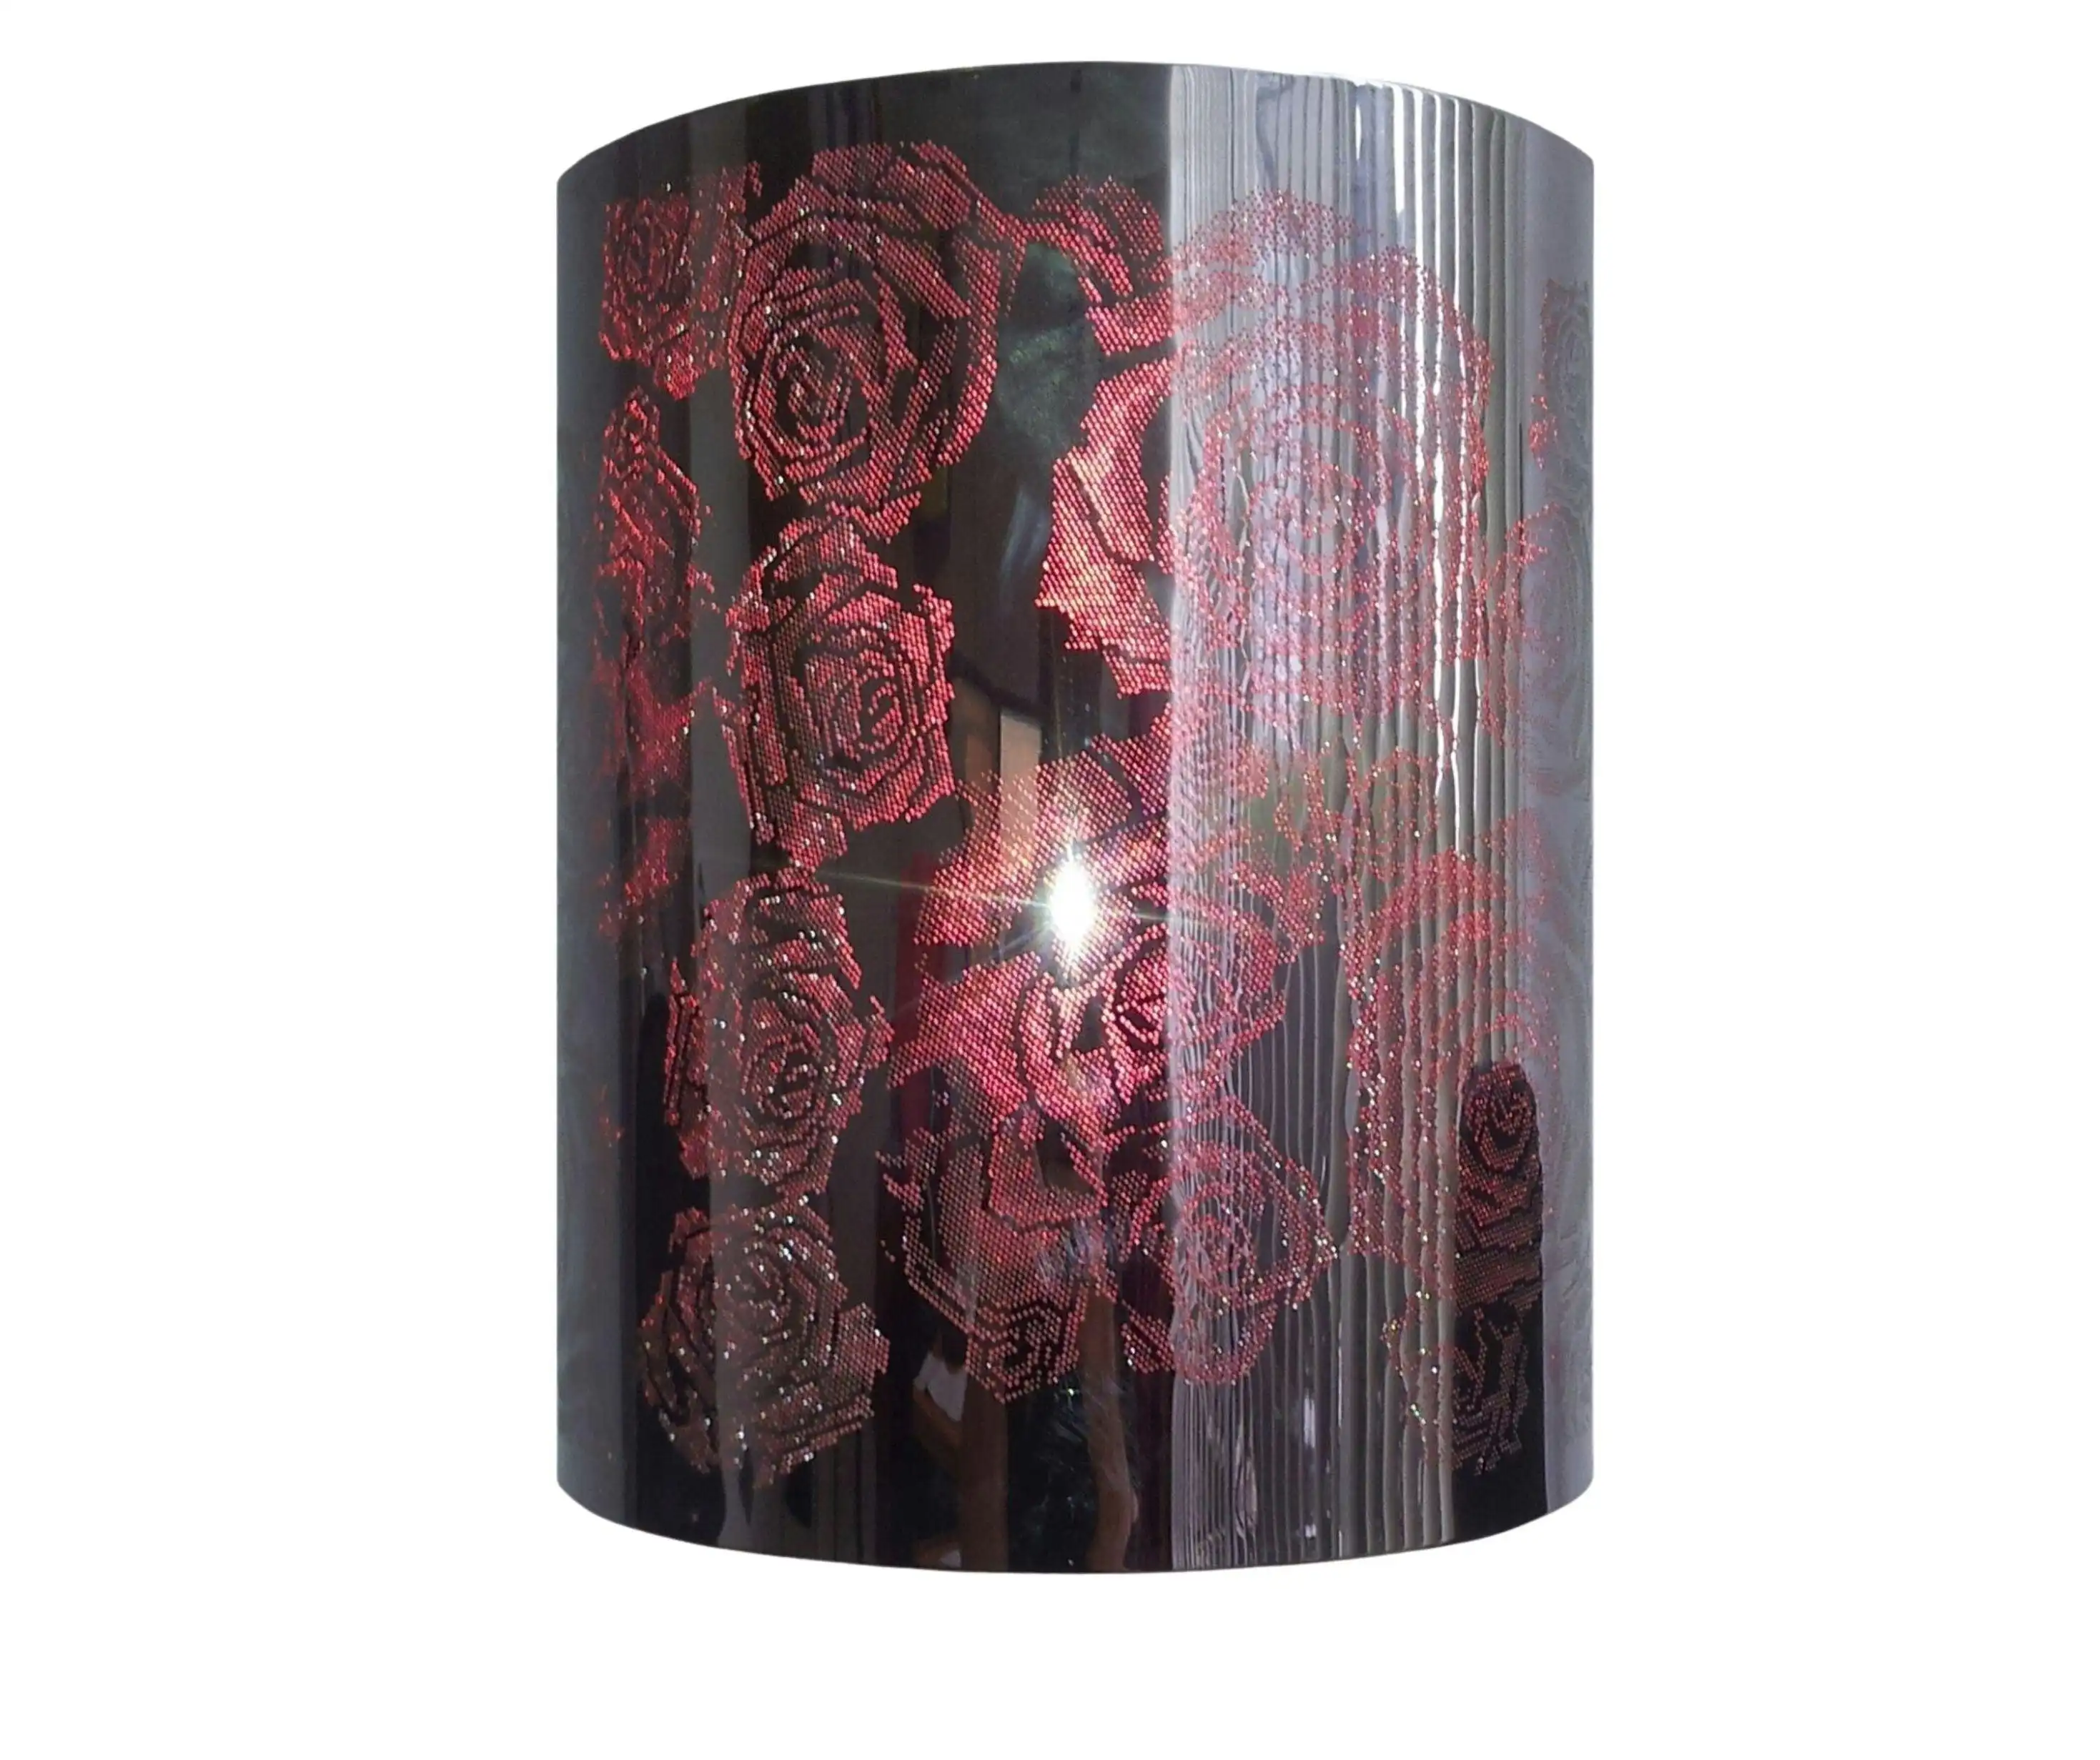 Rose Patterned Laser Cut Chrome Lamp Shade - CLEARANCE OVER 50% OFF